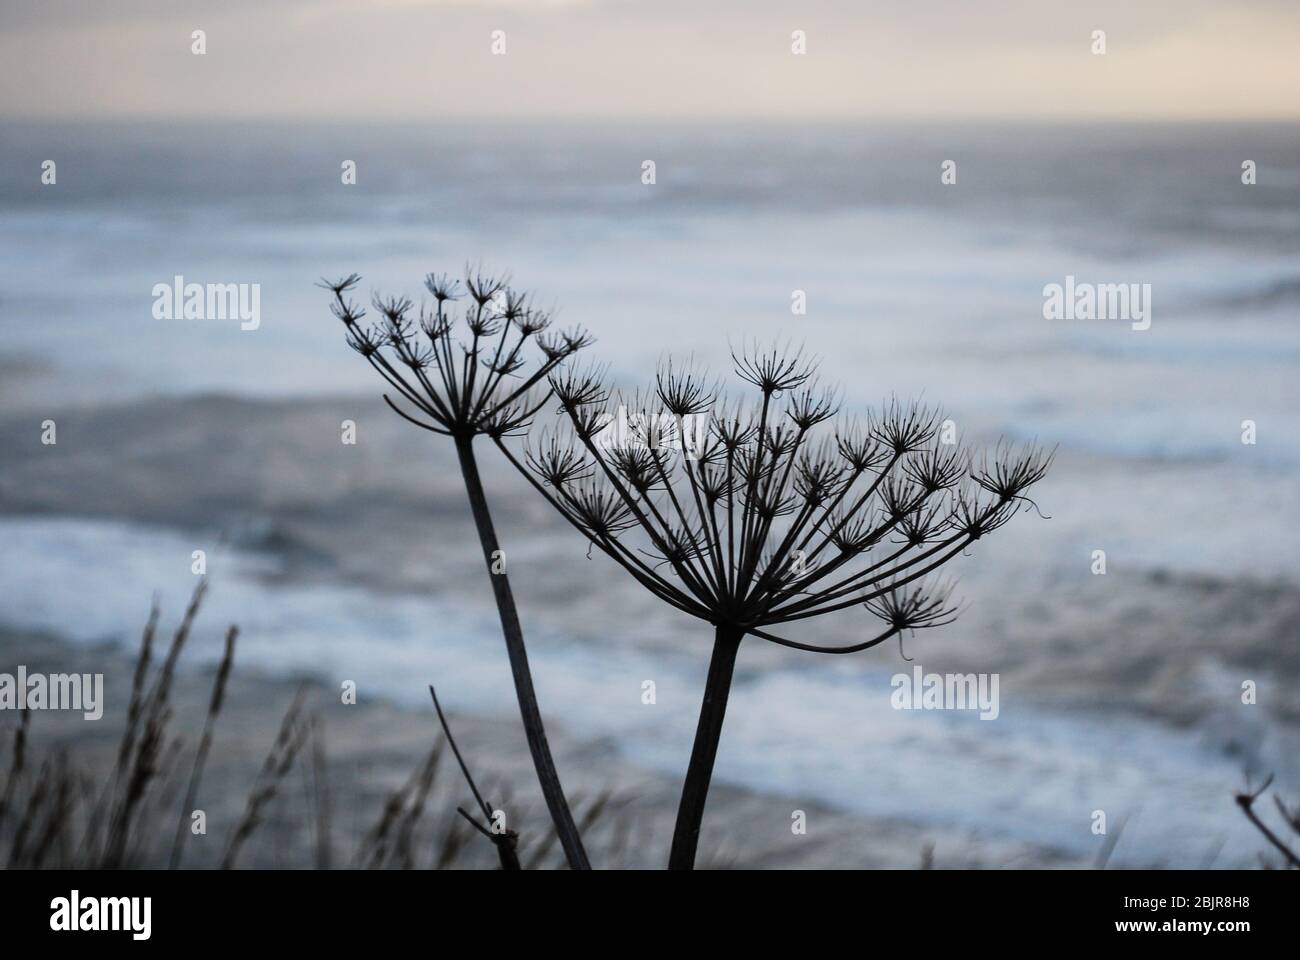 A dry stand of cow parsnip on a cliff overlooking the Pacific Ocean Stock Photo